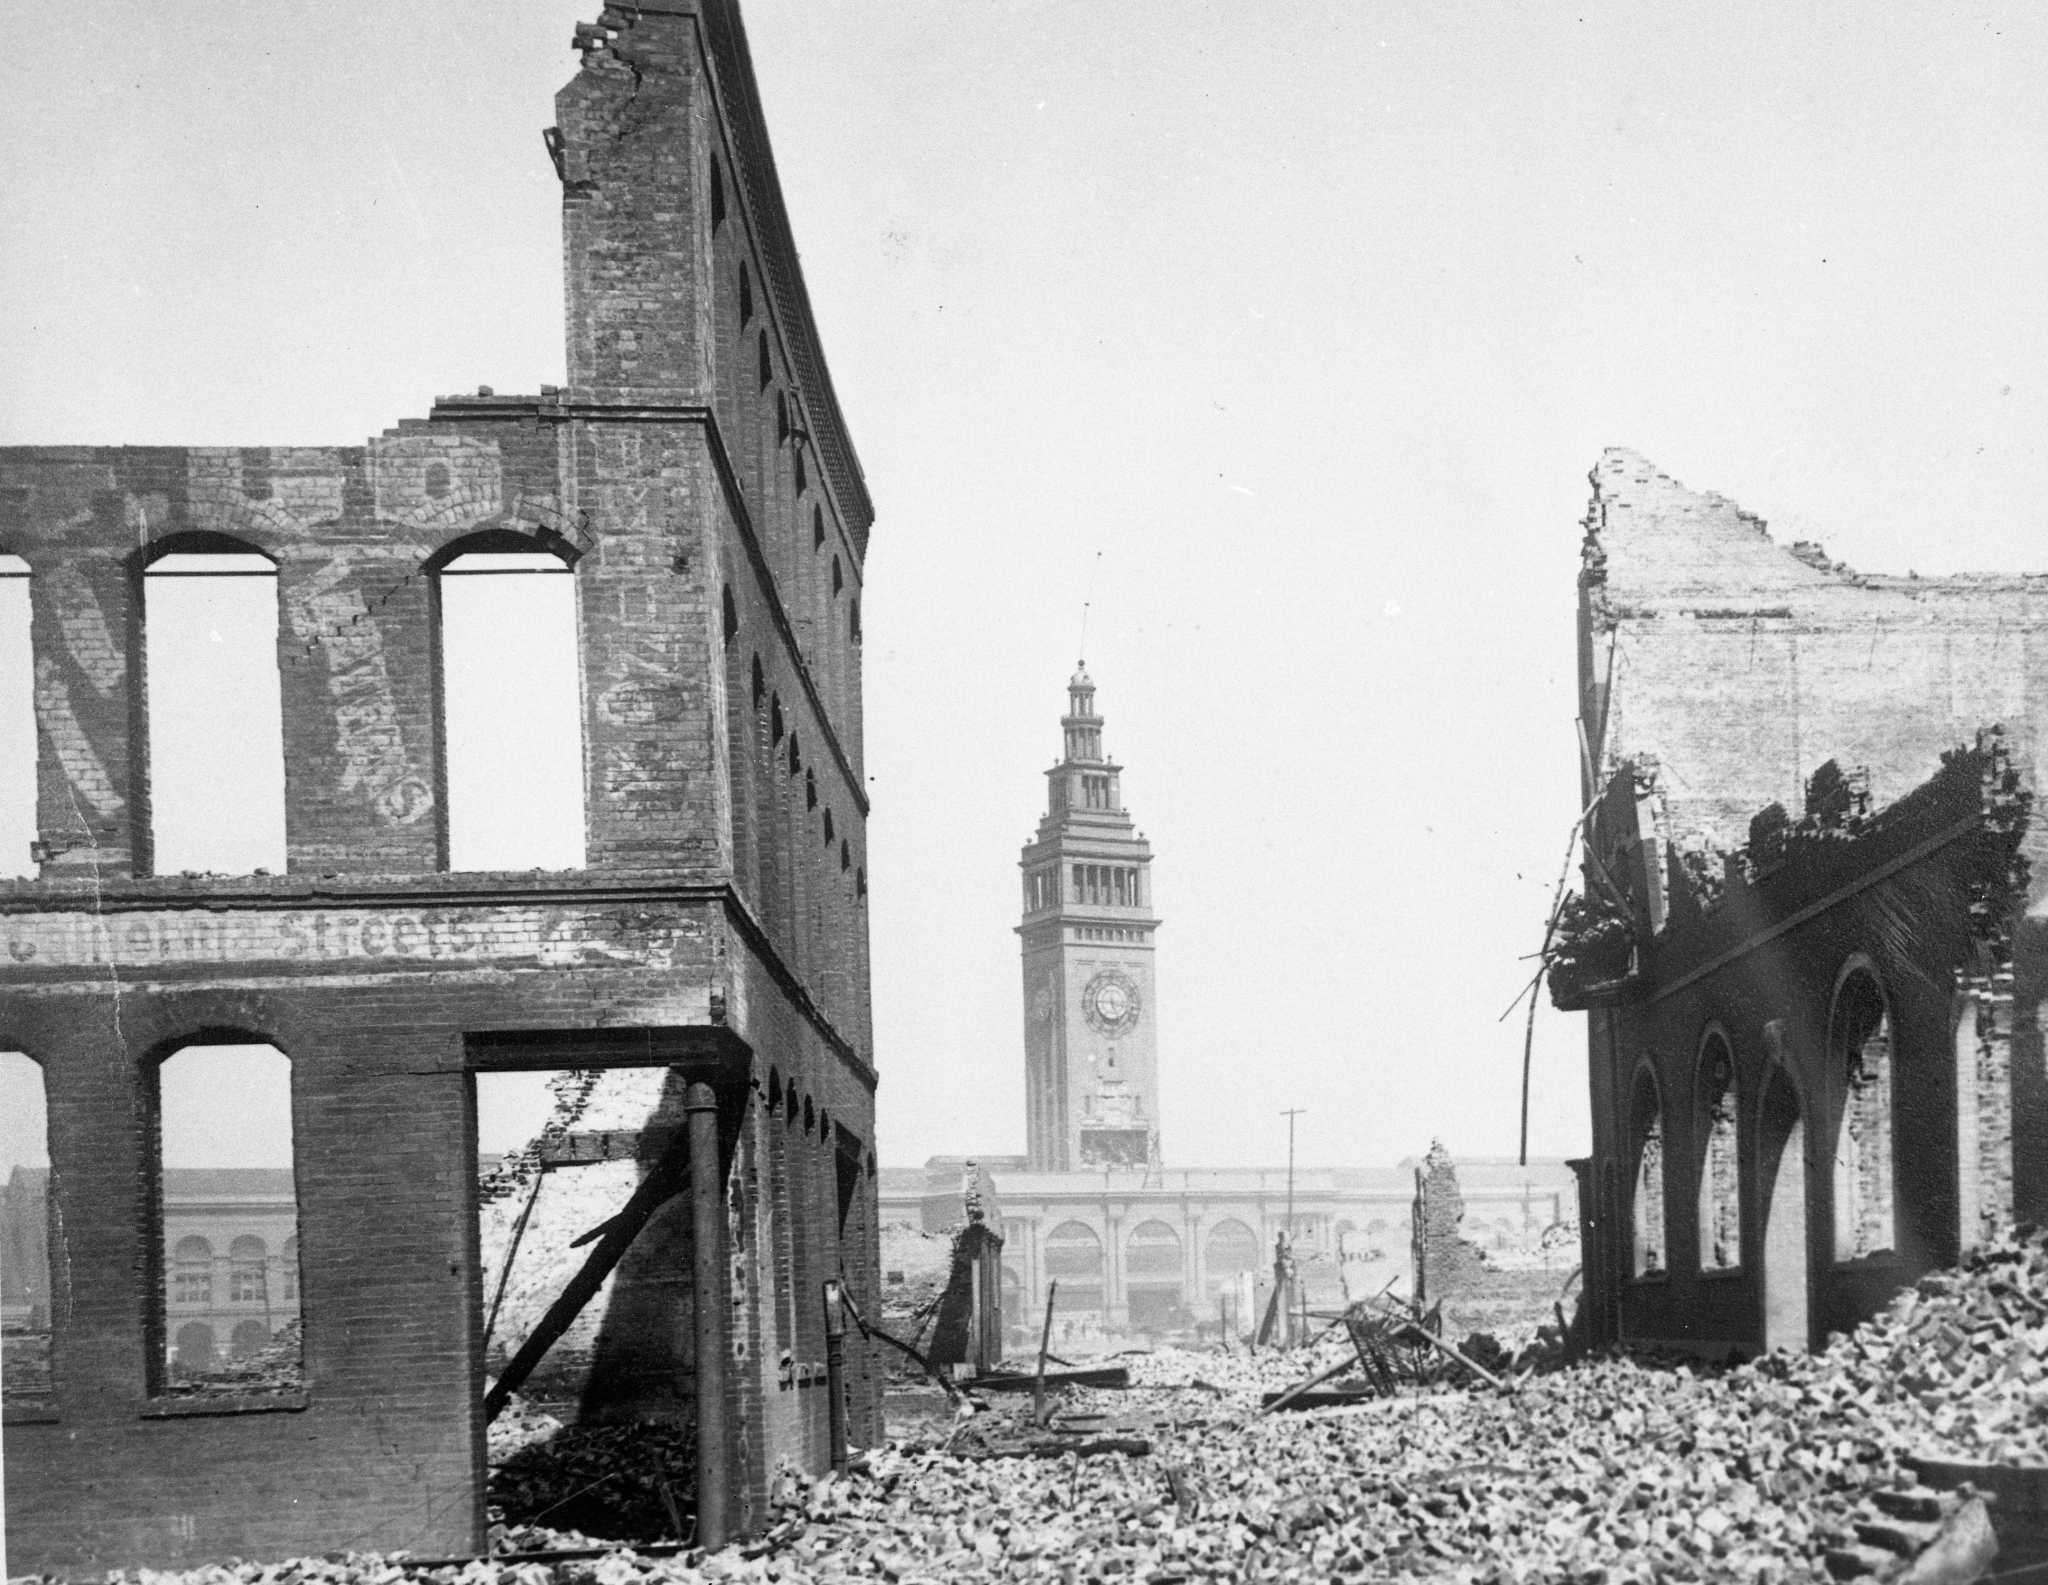 Like Ukrainian cities shattered by war today, S.F. was reduced to rubble in 1906 earthquake